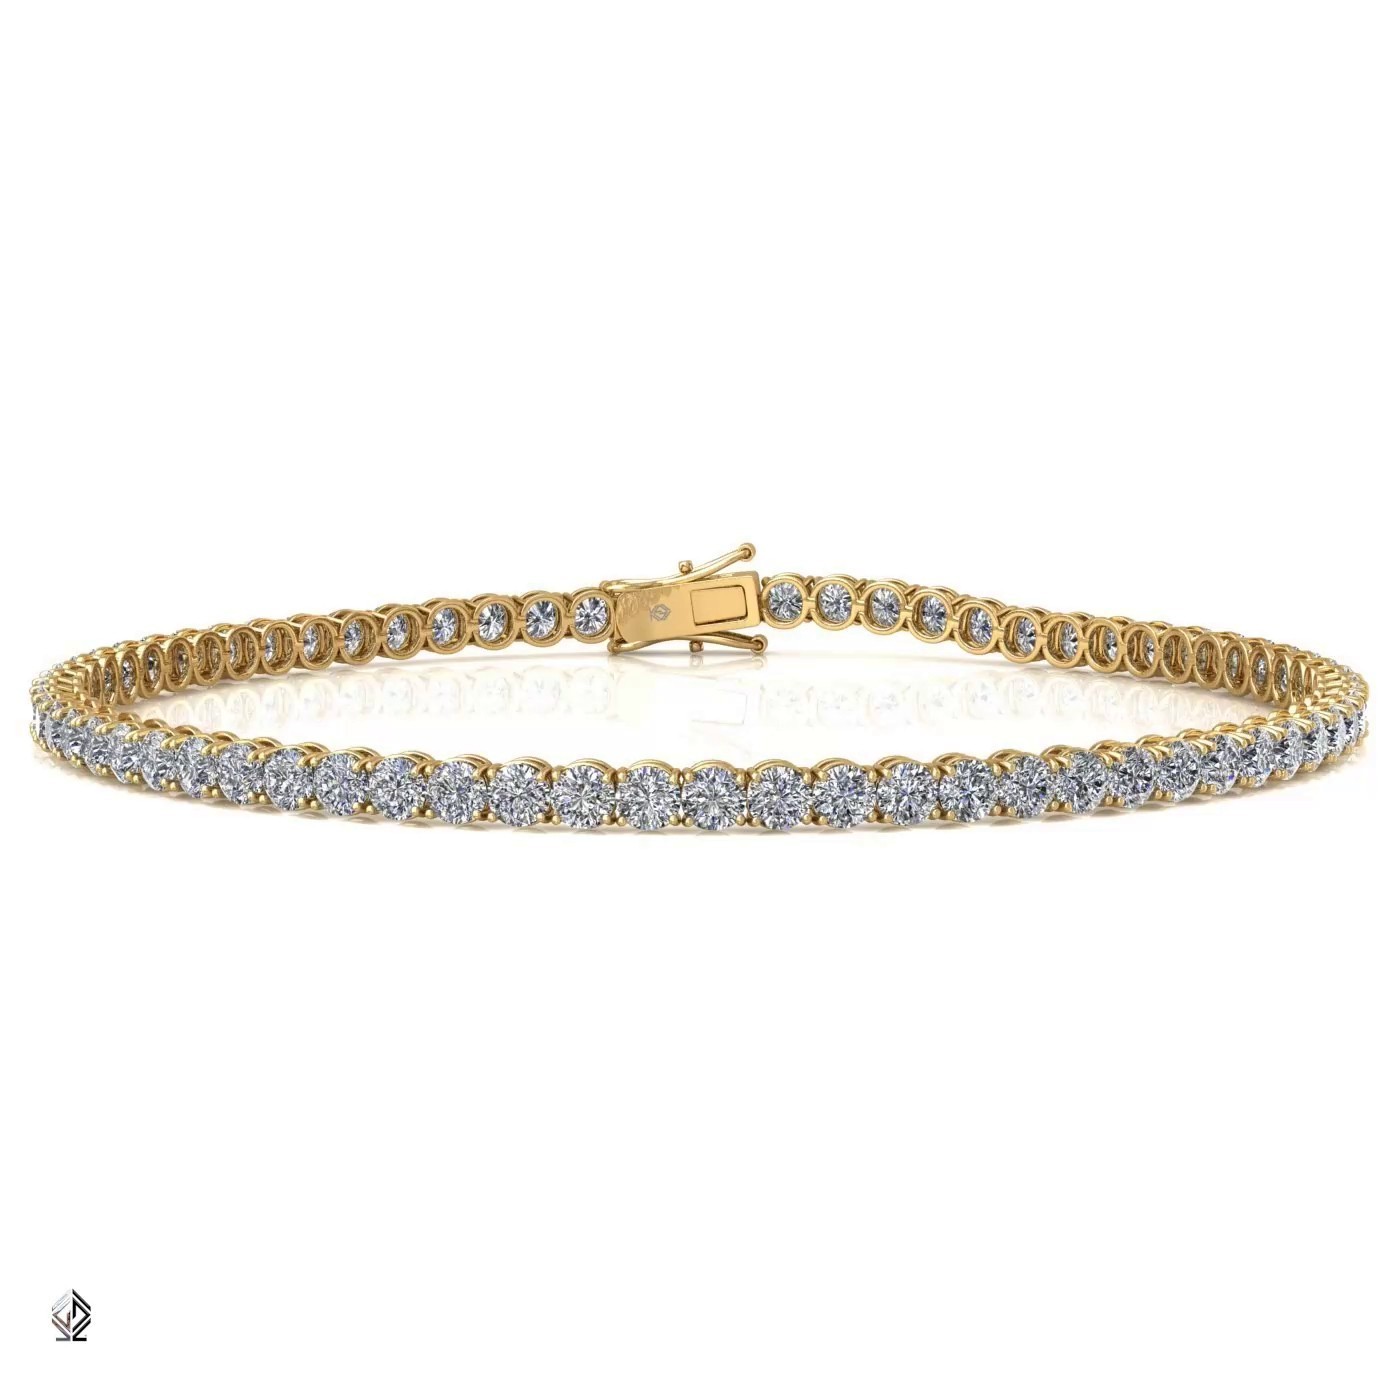 18k yellow gold 2.0mm 4 prong round shape diamond tennis bracelet in round setting Photos & images